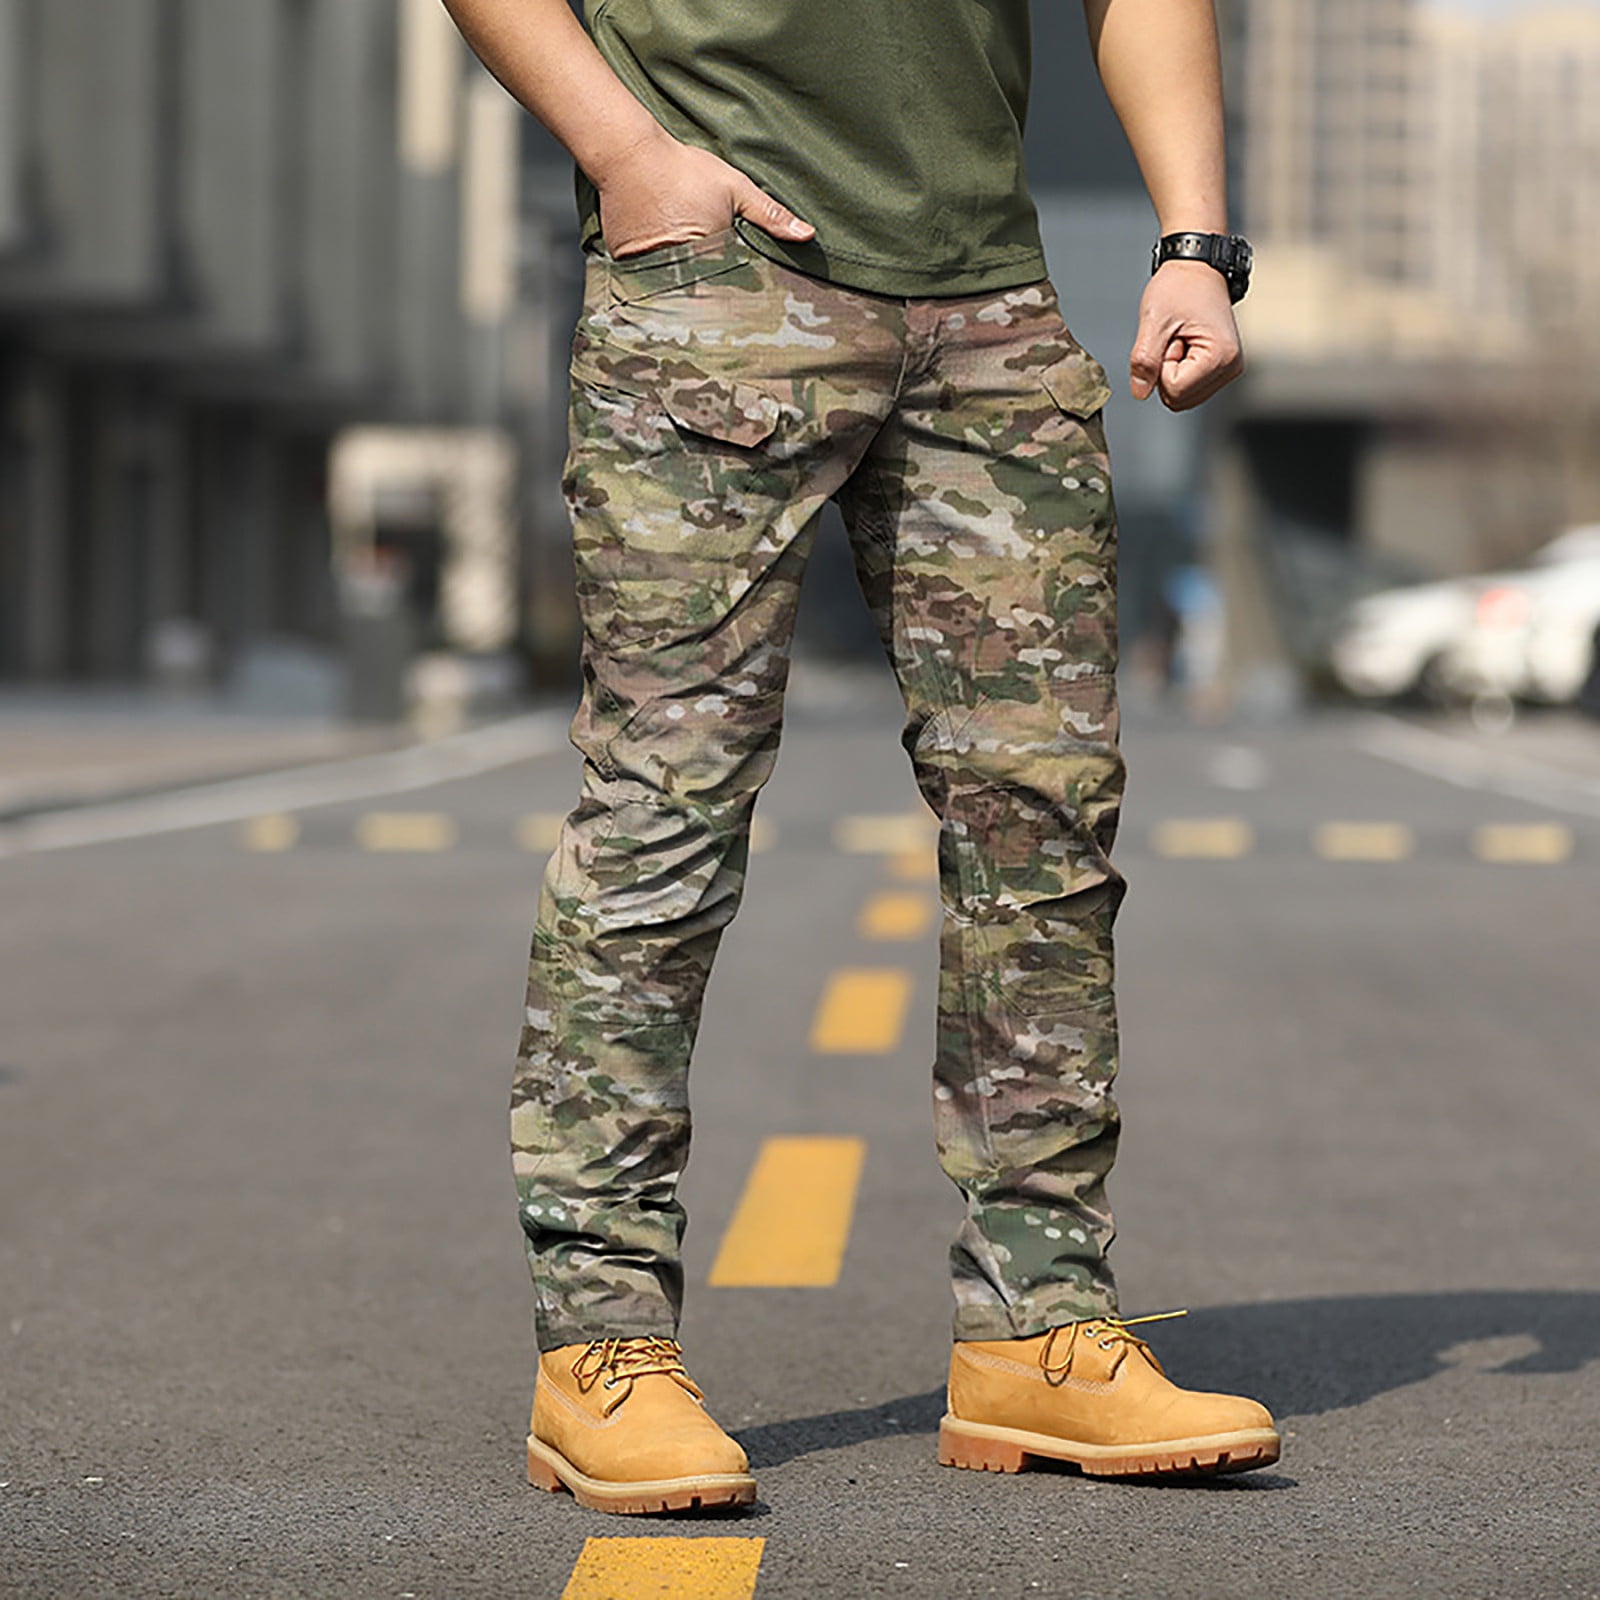 Aueoe Work Pants For Men Sweat Pants Male Men's Tooling Camouflage